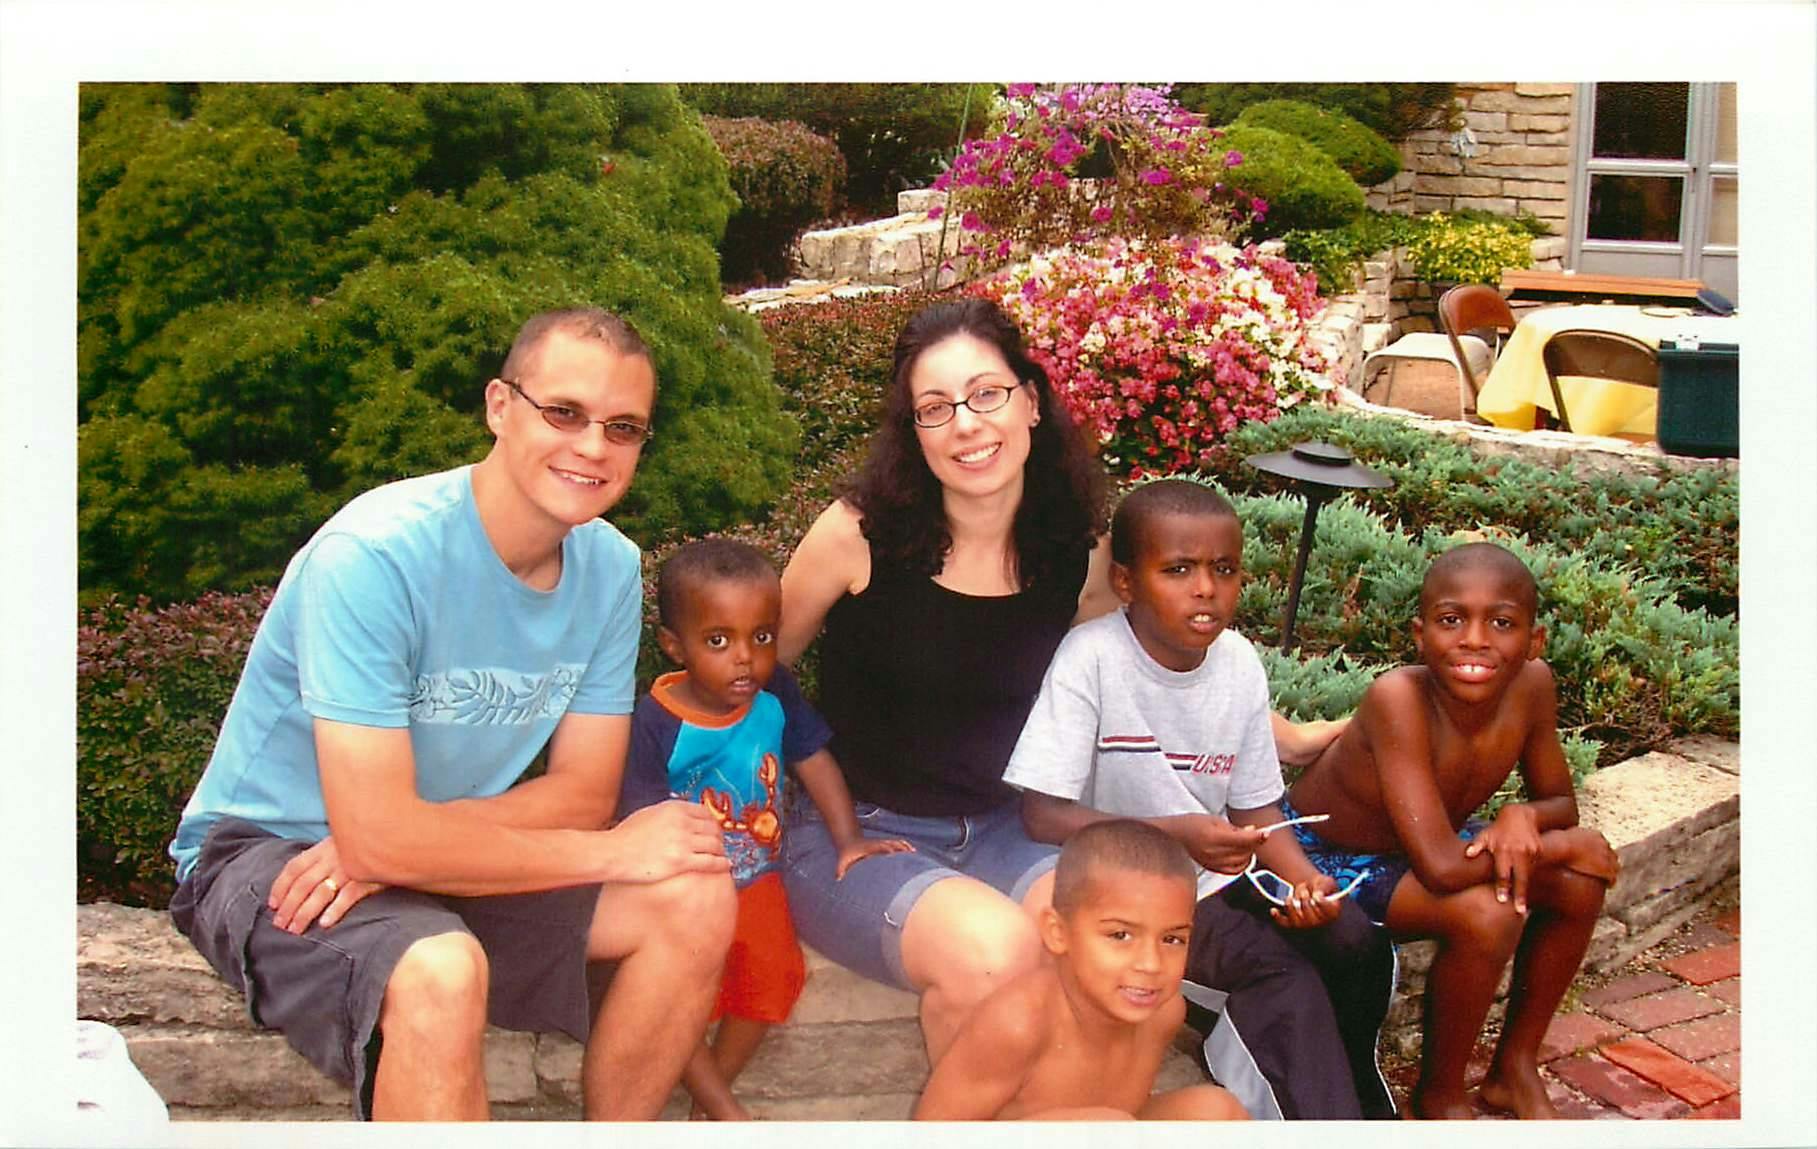 The expanded Cooper Family in July 2006: 2 parents, 4 children